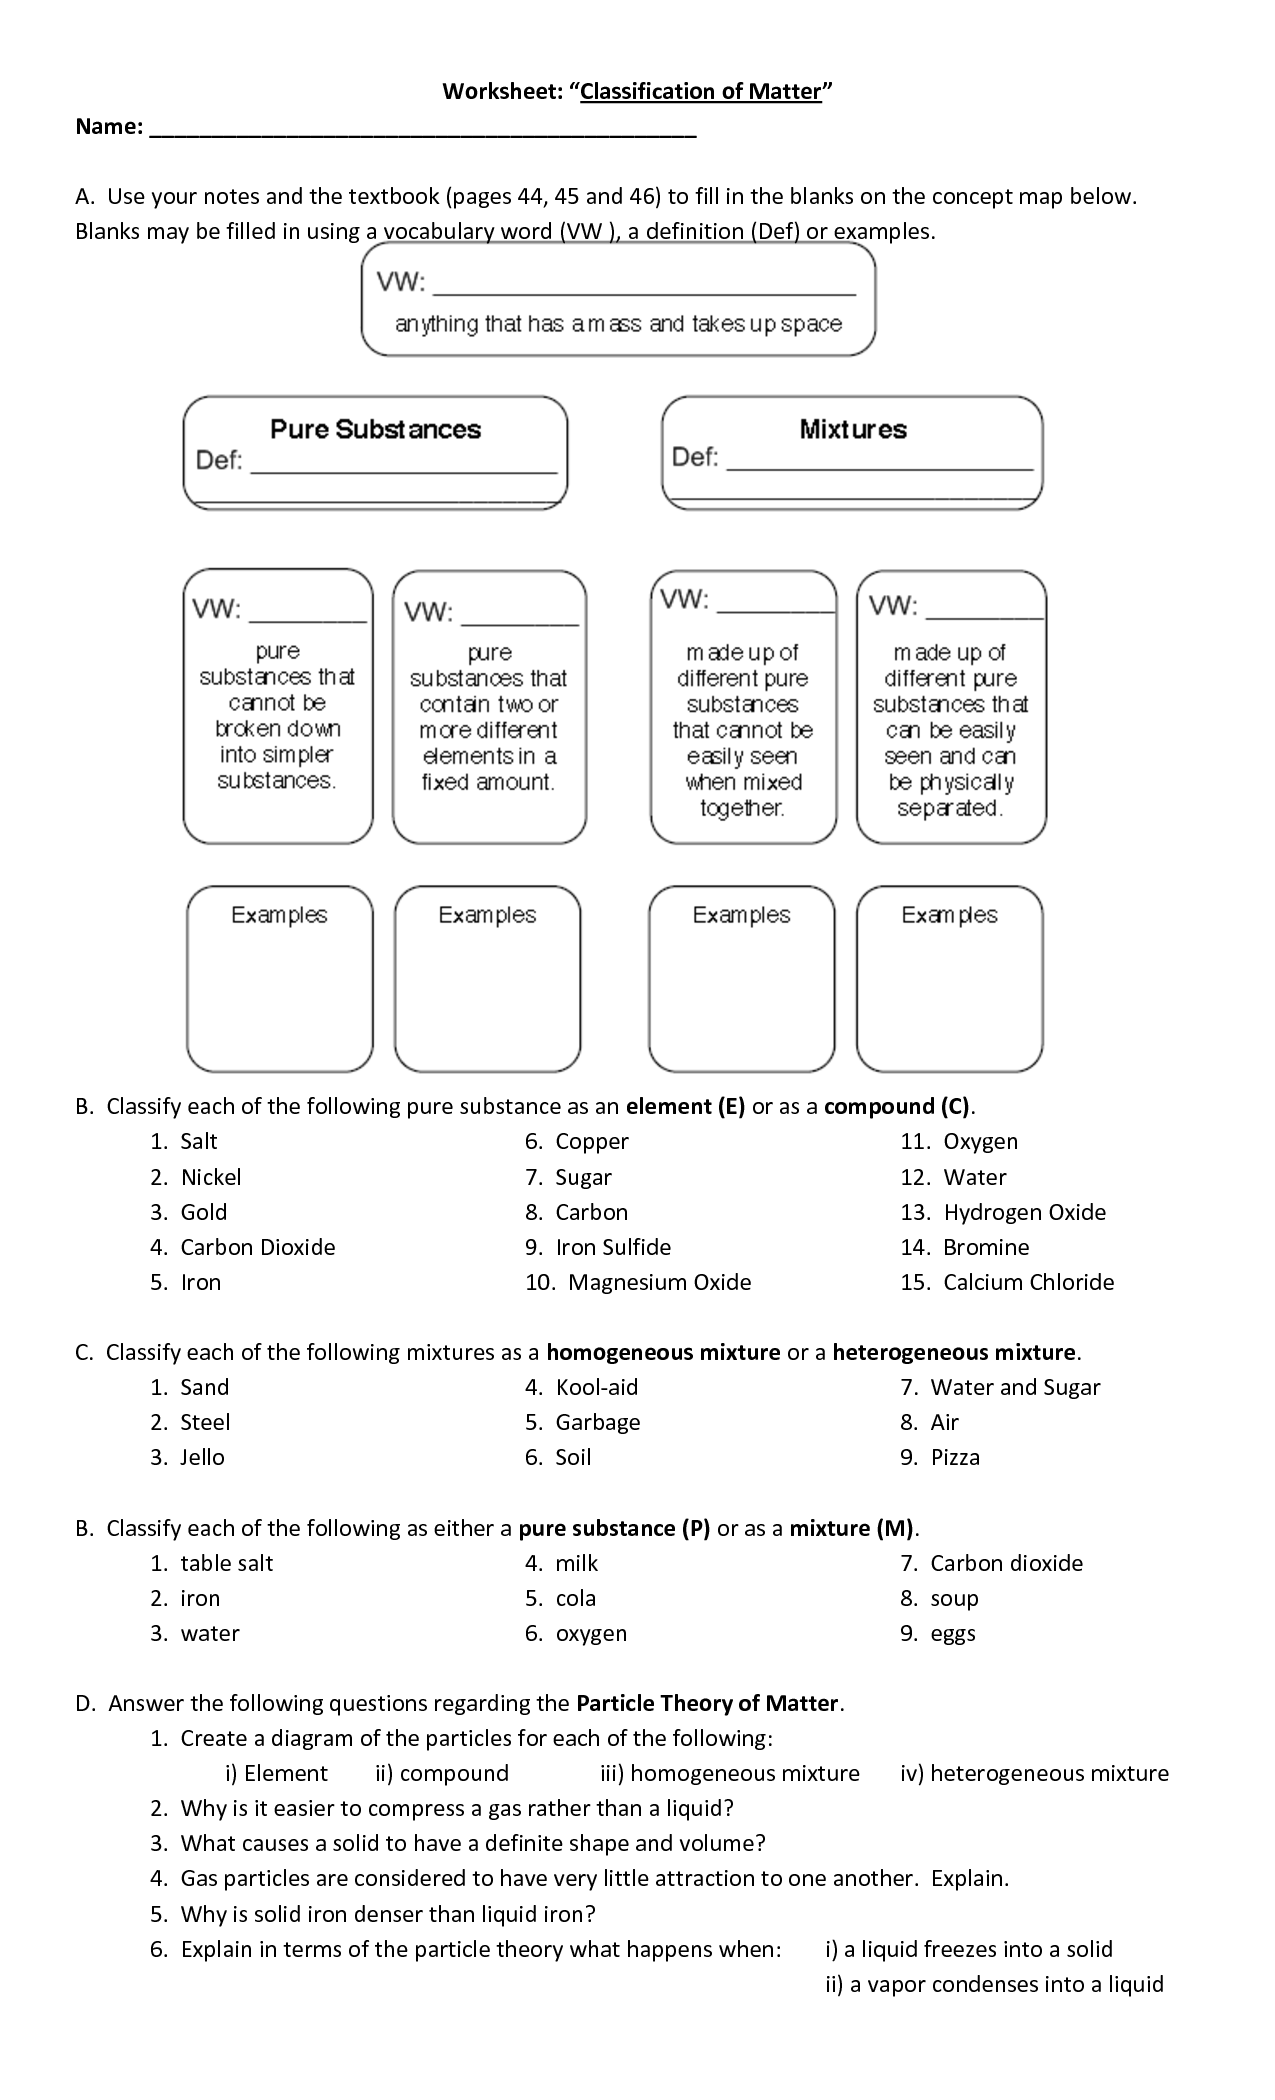 classification-of-matter-worksheets